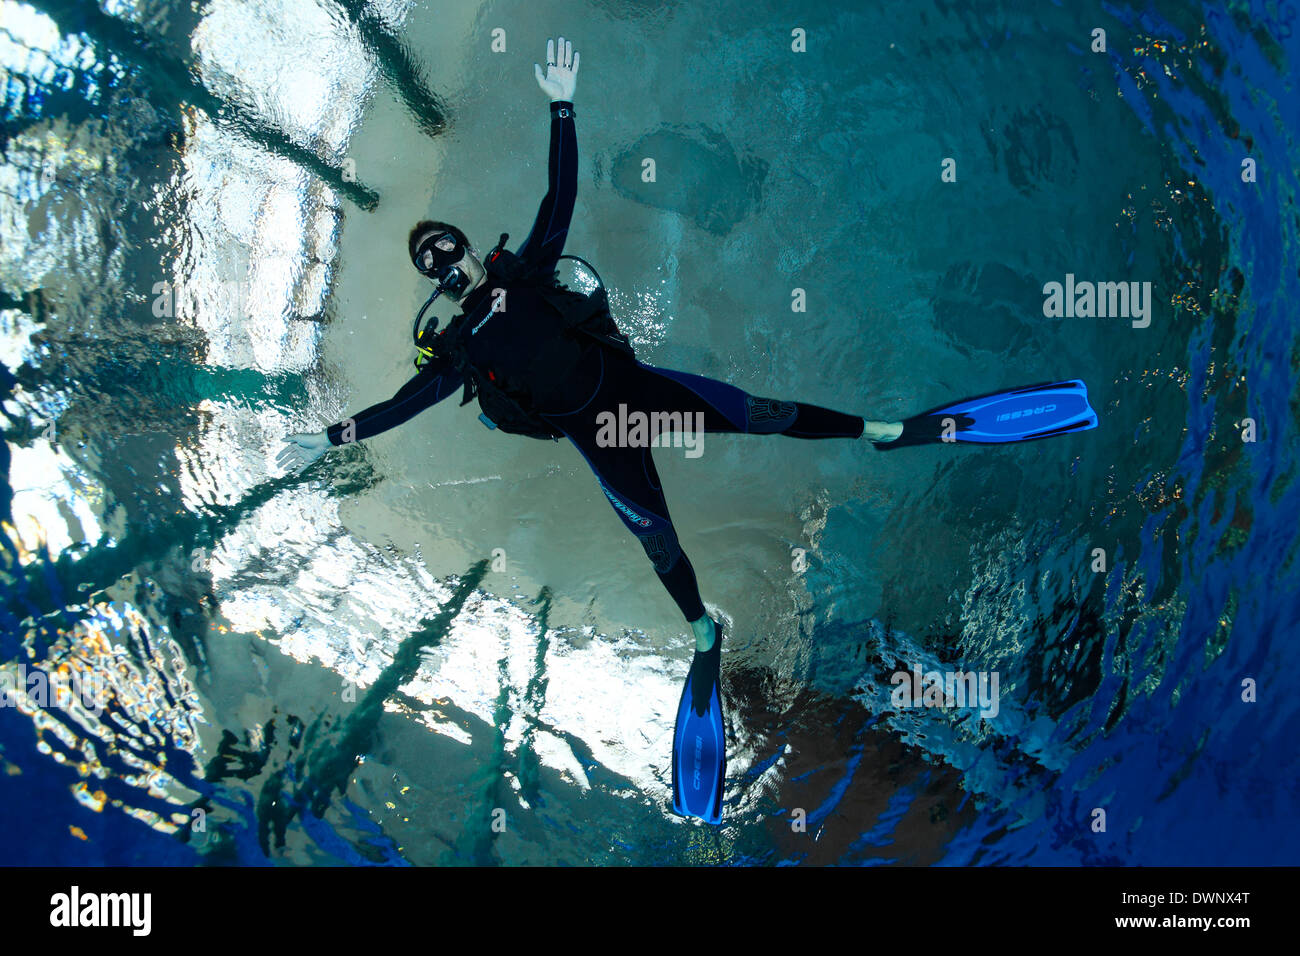 Dive training, scuba diver with outstretched arms and legs, balancing, in a swimming pool, Nuremberg, Bavaria, Germany Stock Photo